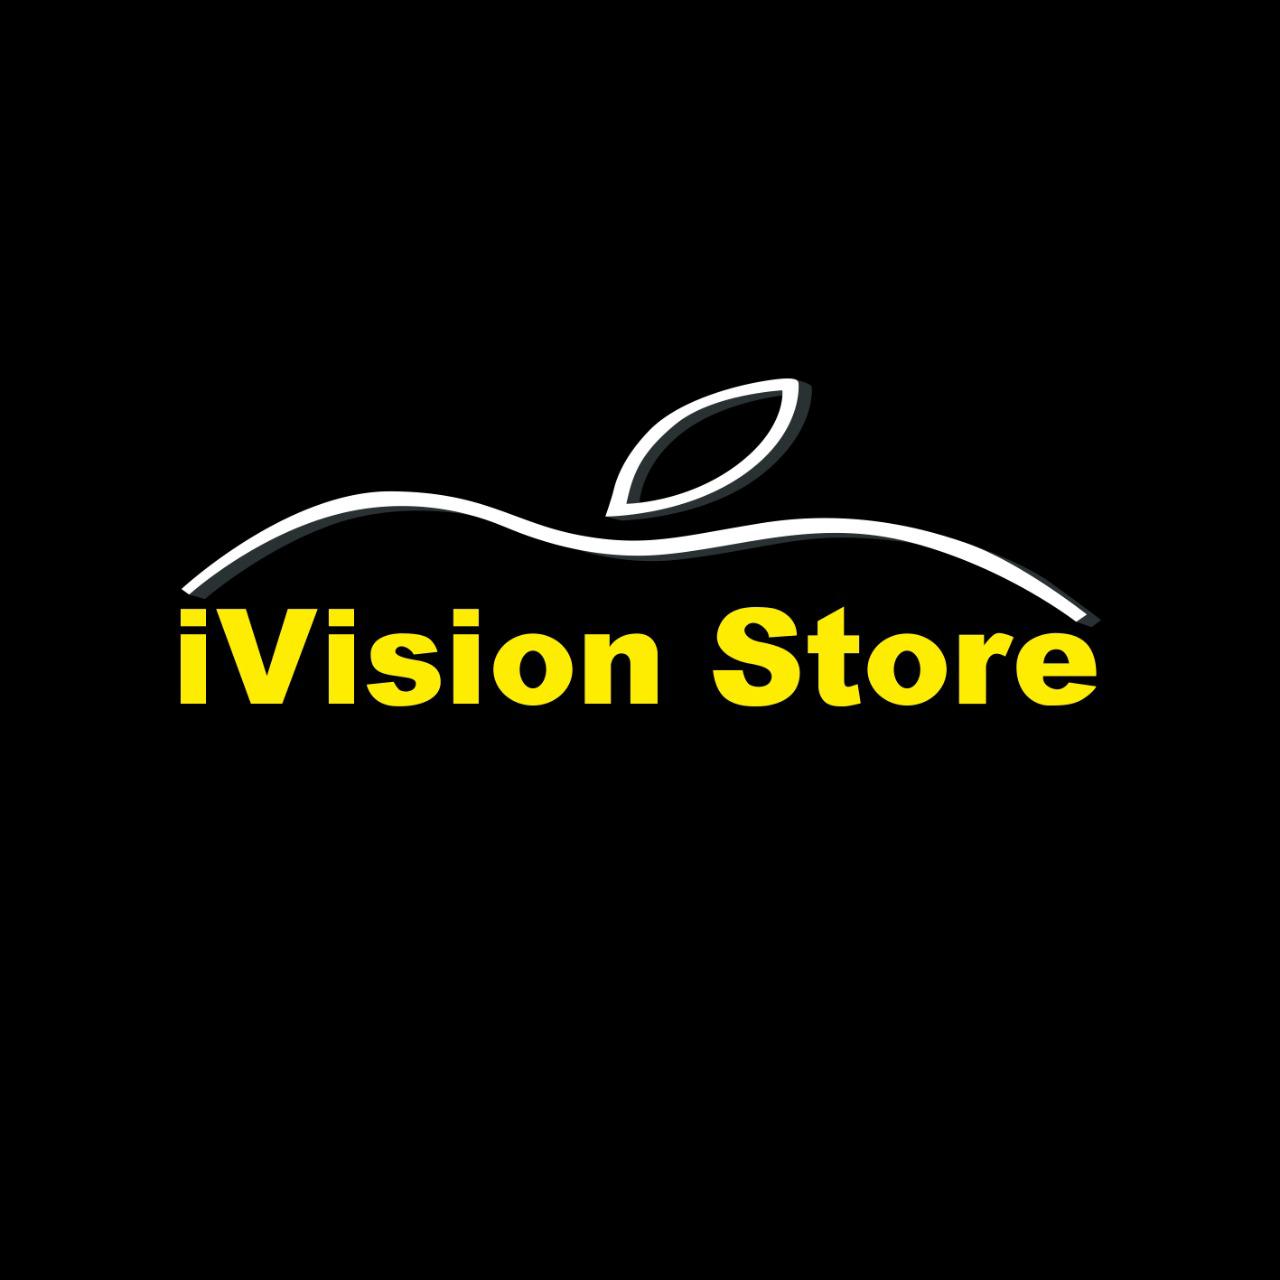 IVISION STORE